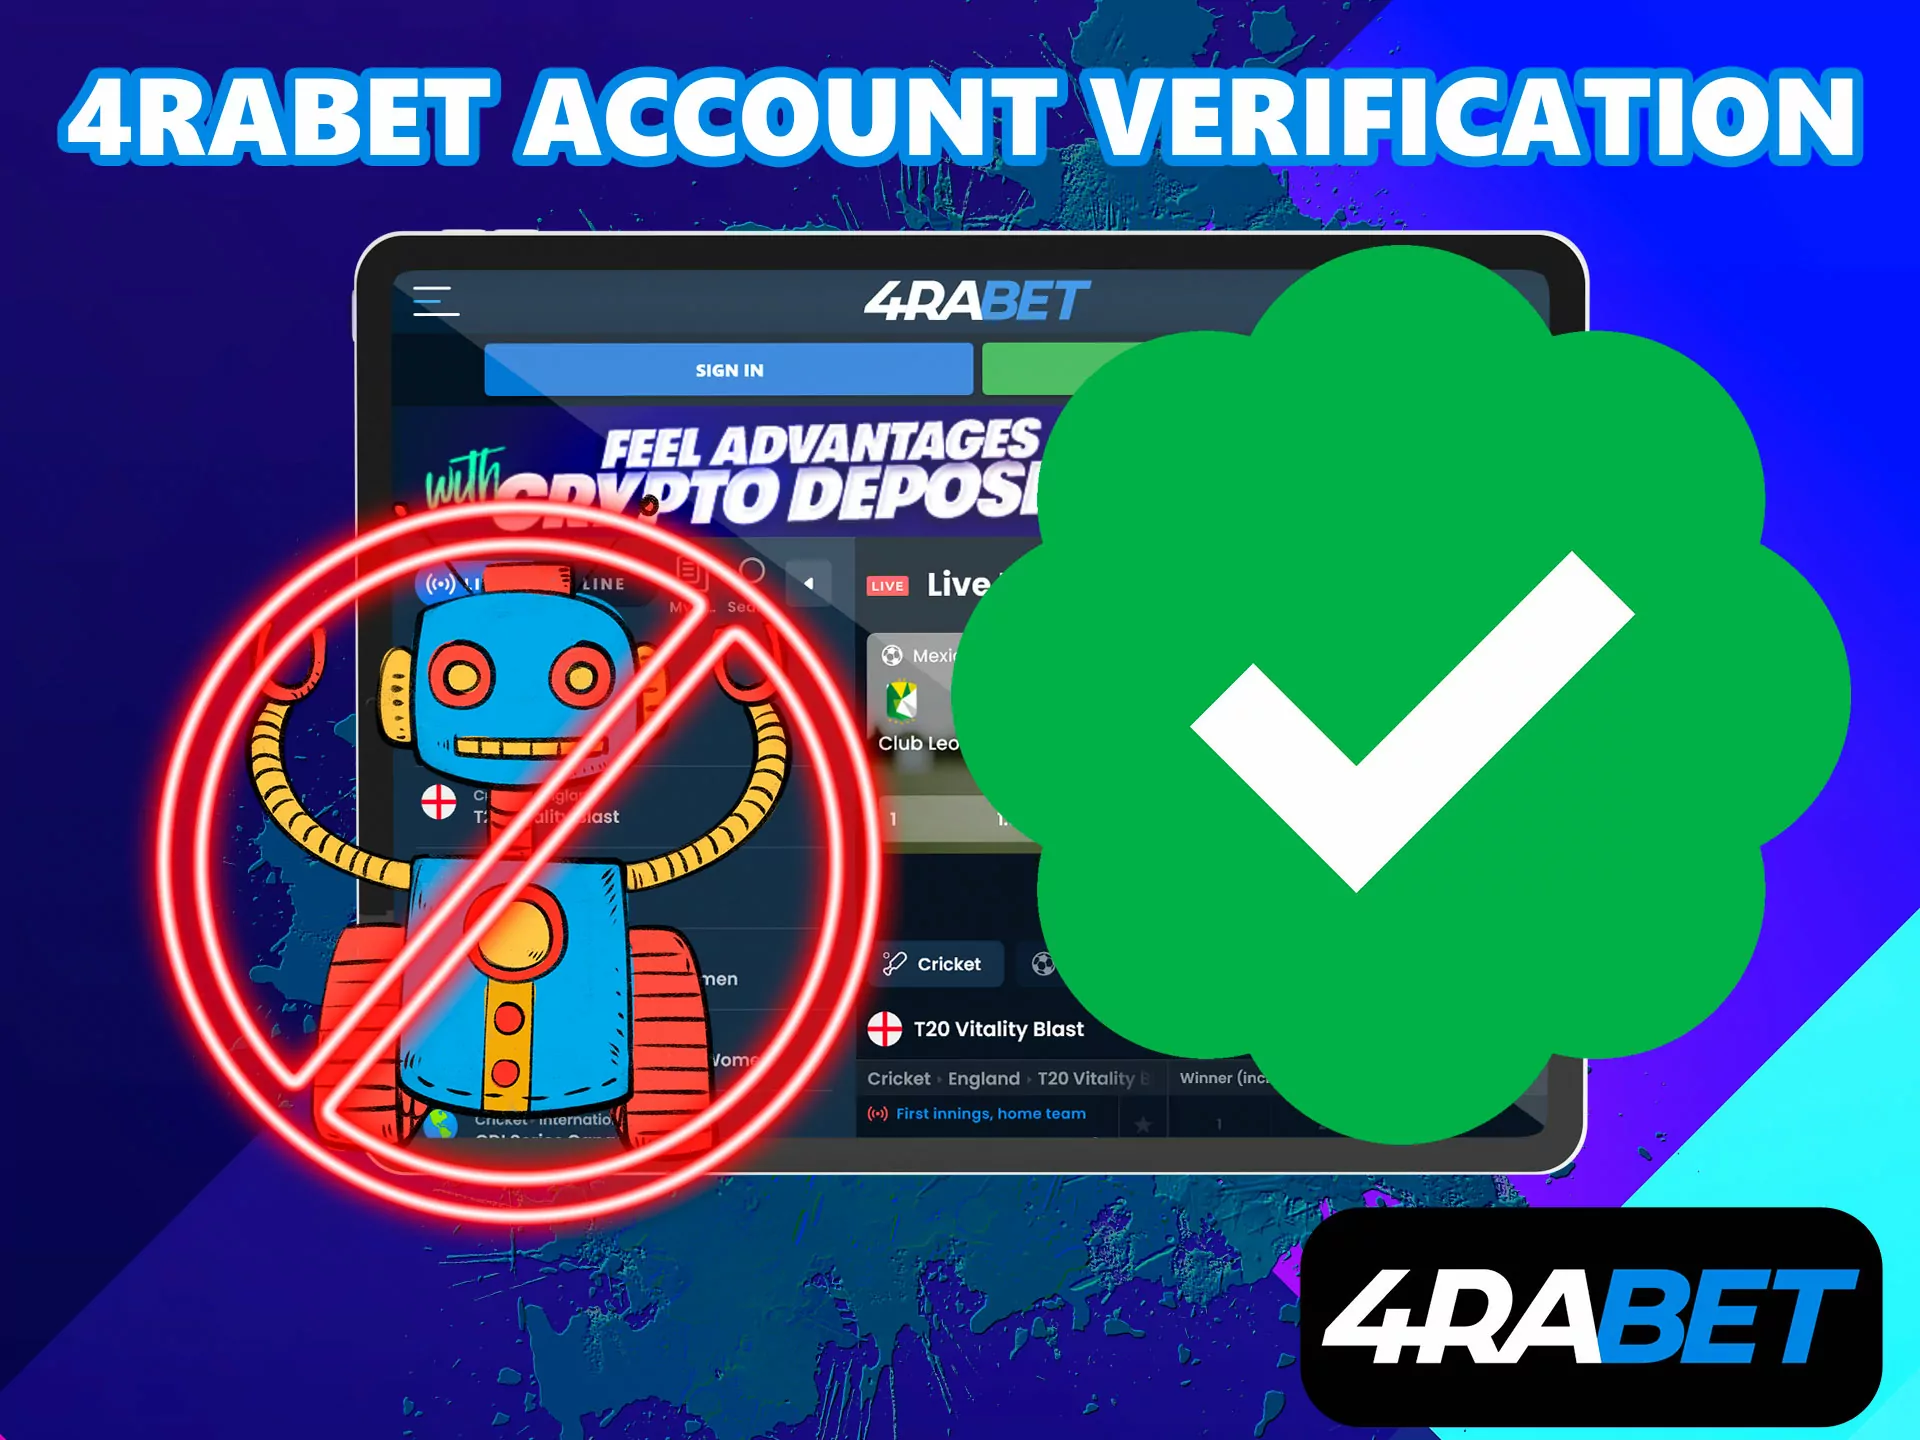 The bookmaker protects its players from scammers and bots, this is a standard verification procedure.